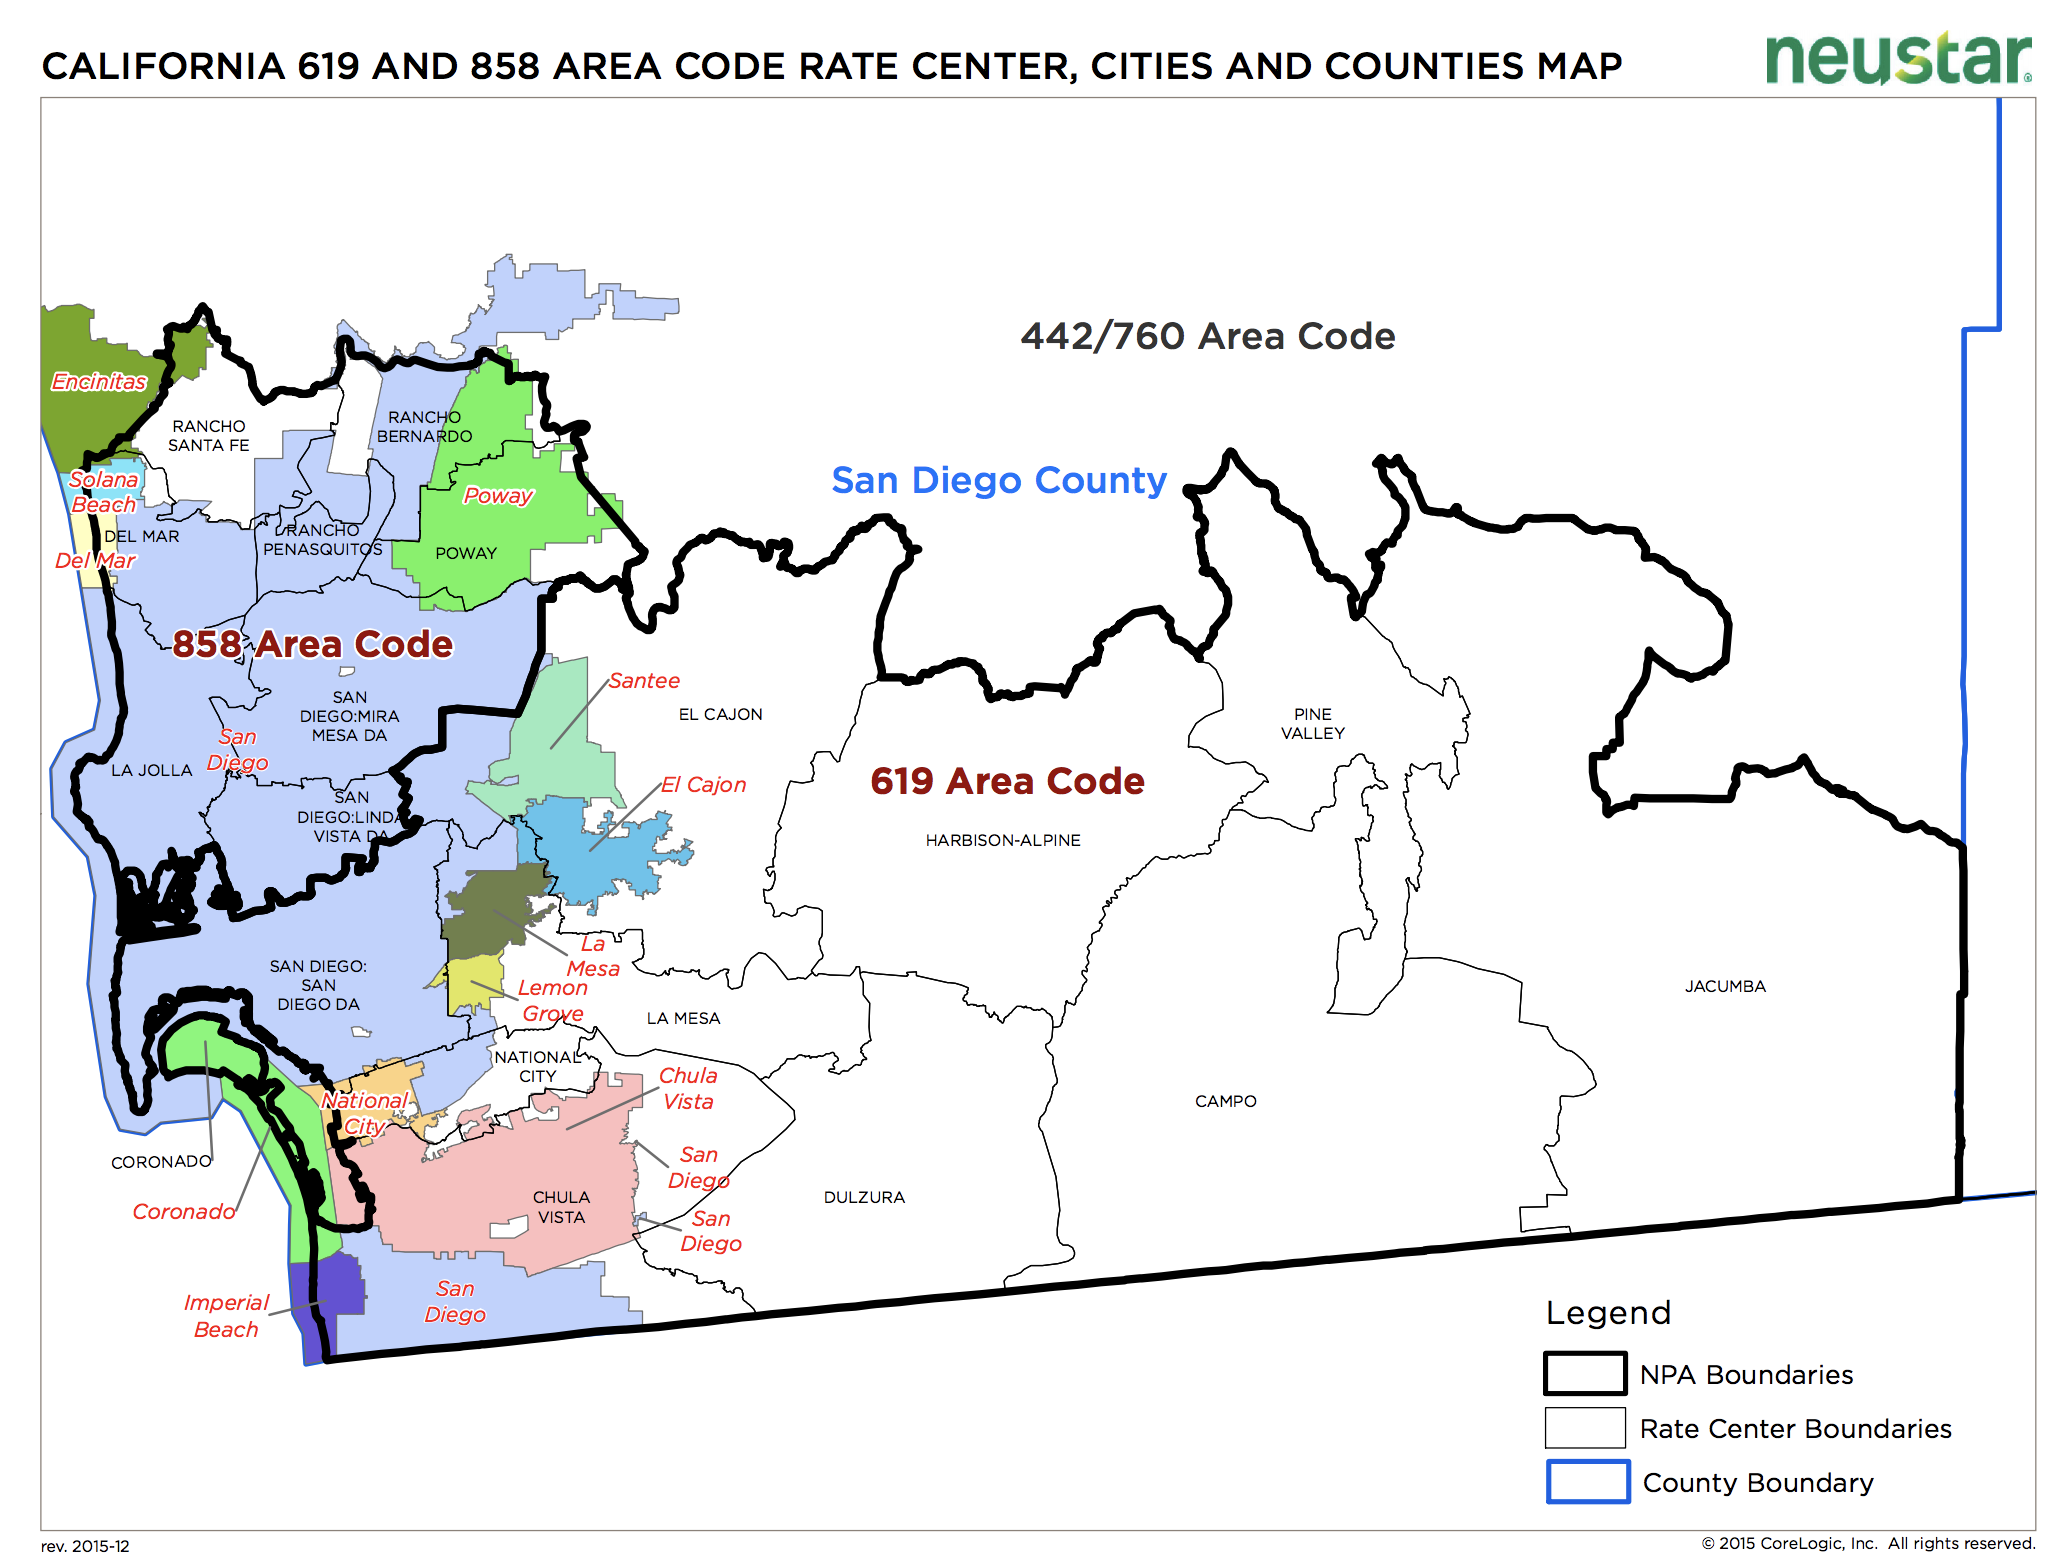 A map showing the geography of San Diego divided into sections by area codes (858 and 619) and rate center boundaries